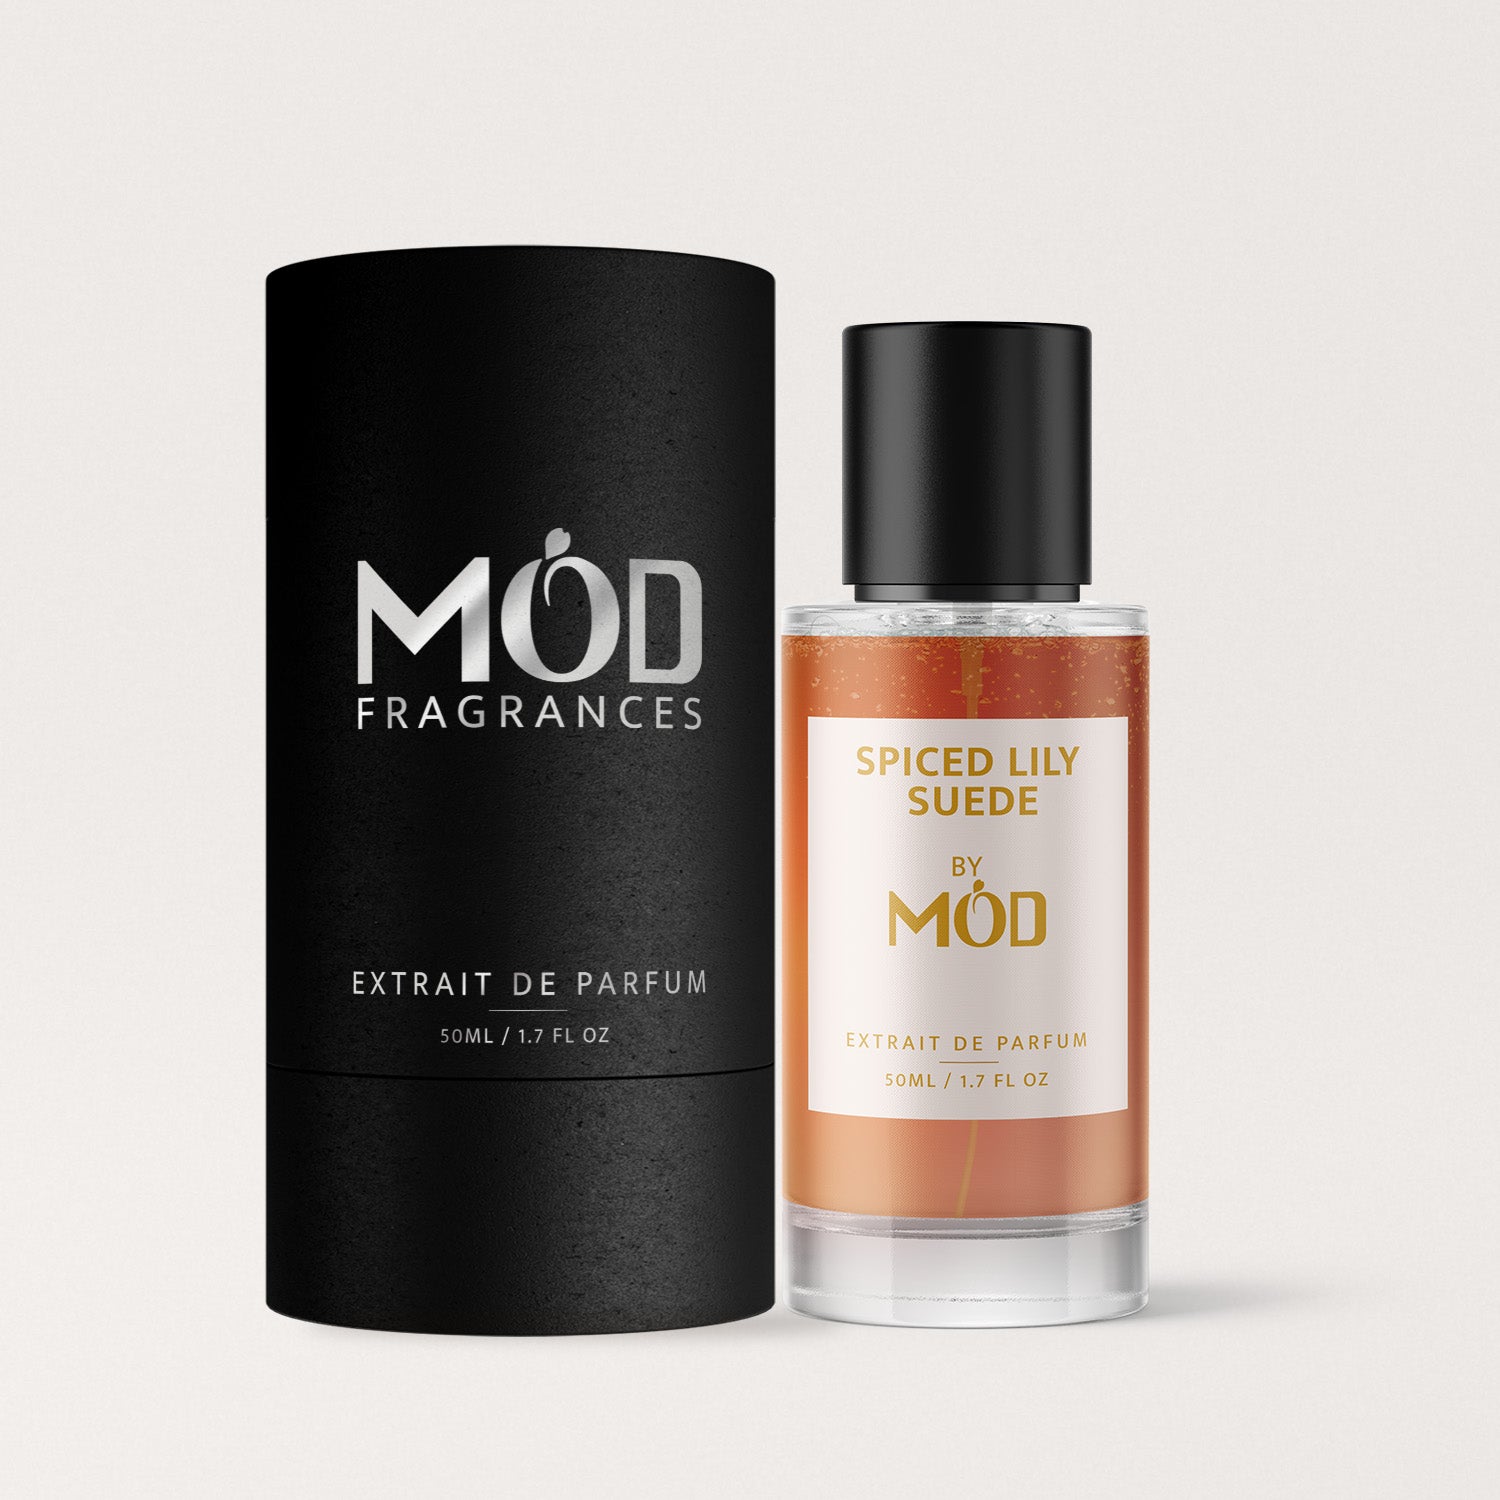 Spiced Lily Suede - Mod Fragrances